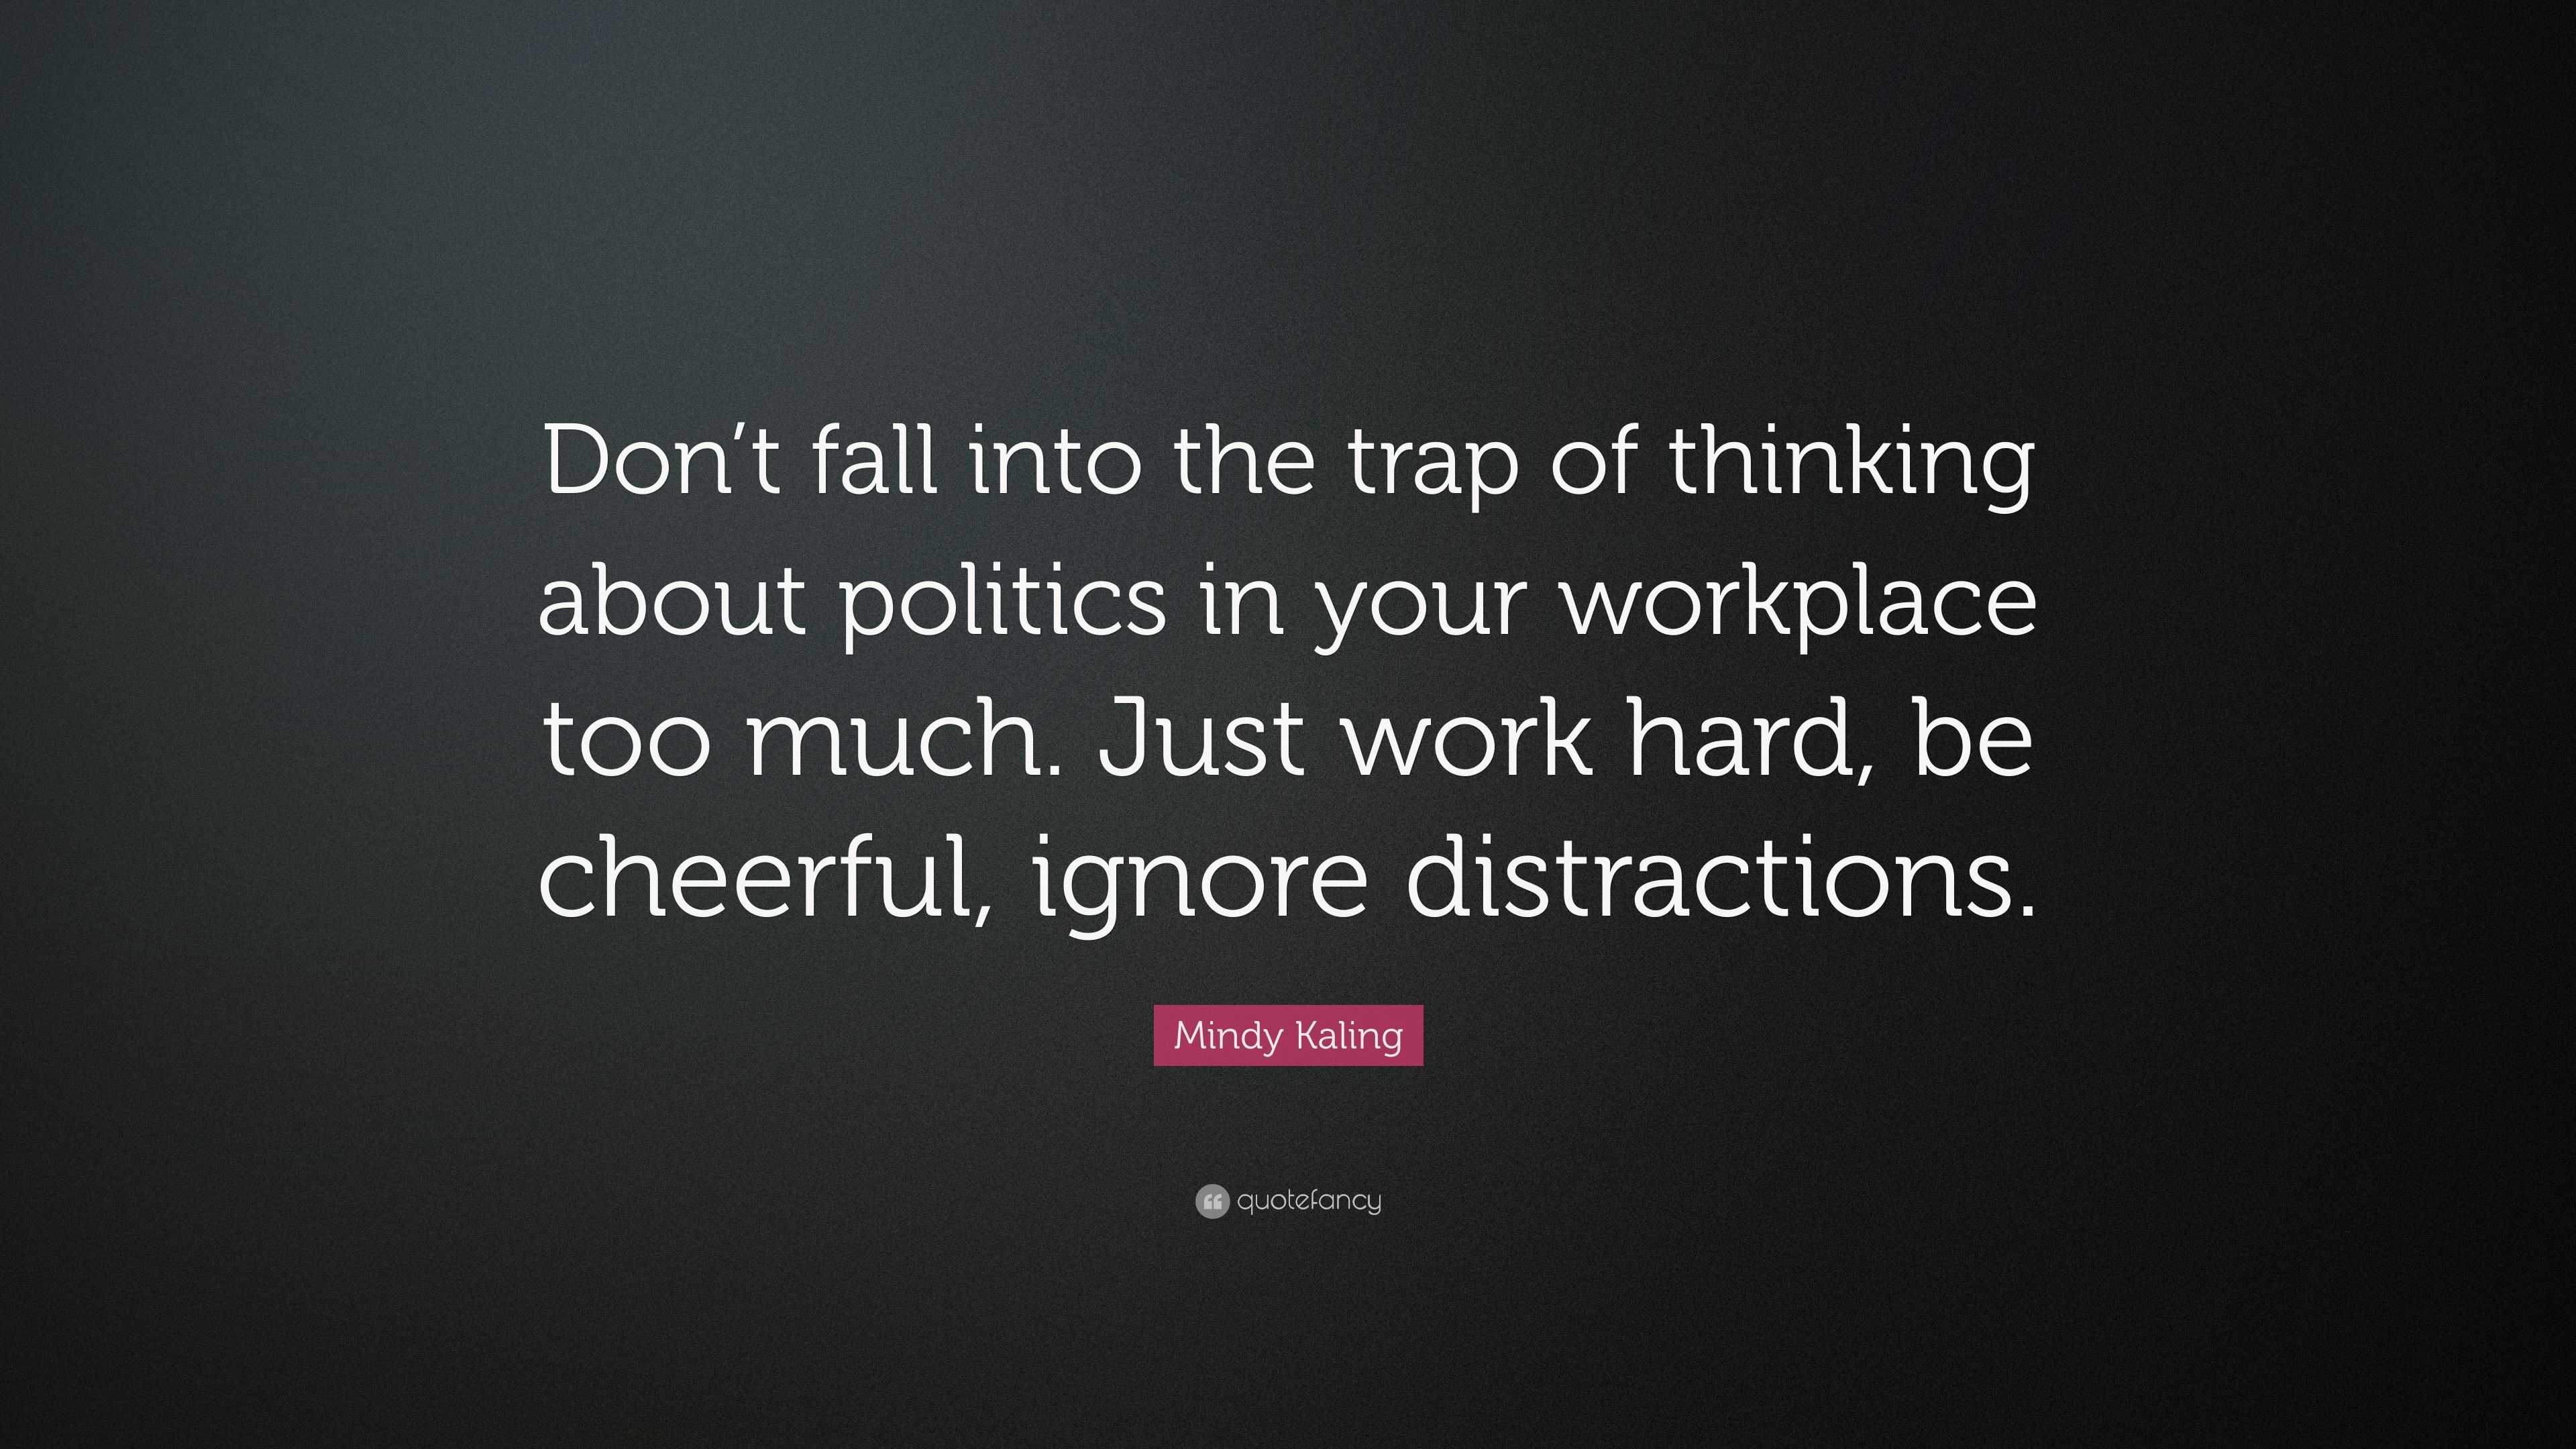 Mindy Kaling Quote “Don’t fall into the trap of thinking